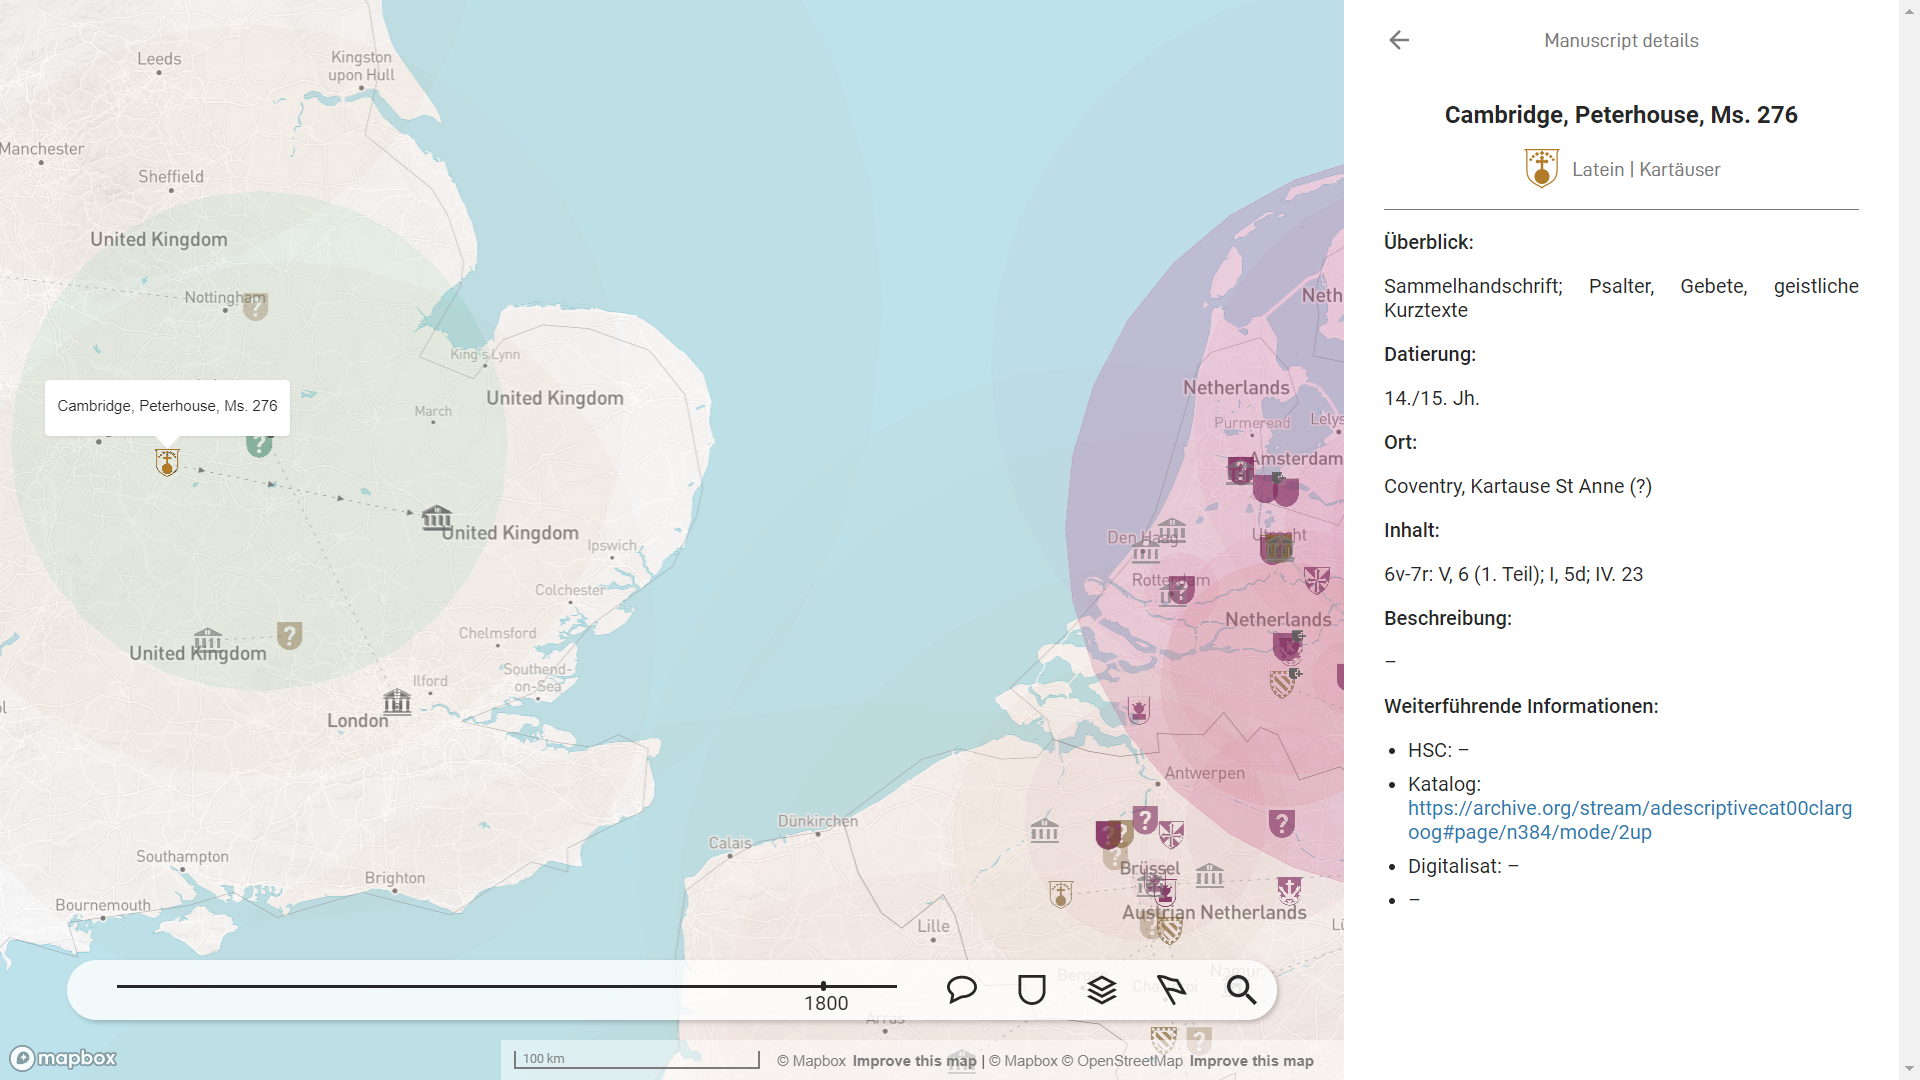 Screenshot of MMMMO. The map section shows the Netherlands and southern England, overlayed with numerous map features. Crests of monastic orders are displayed as icons to show the location and the belonging of each manuscript. The icons are of different colors, some have half-transparent circles around them and some are connected by solid, dashed or dotted lines. At the bottom of the screen is a taskbar with a timeline slider and several icons to filter the displayed features. At the right side of the screen is a sidebar that displays the details of the currently selected manuscript.